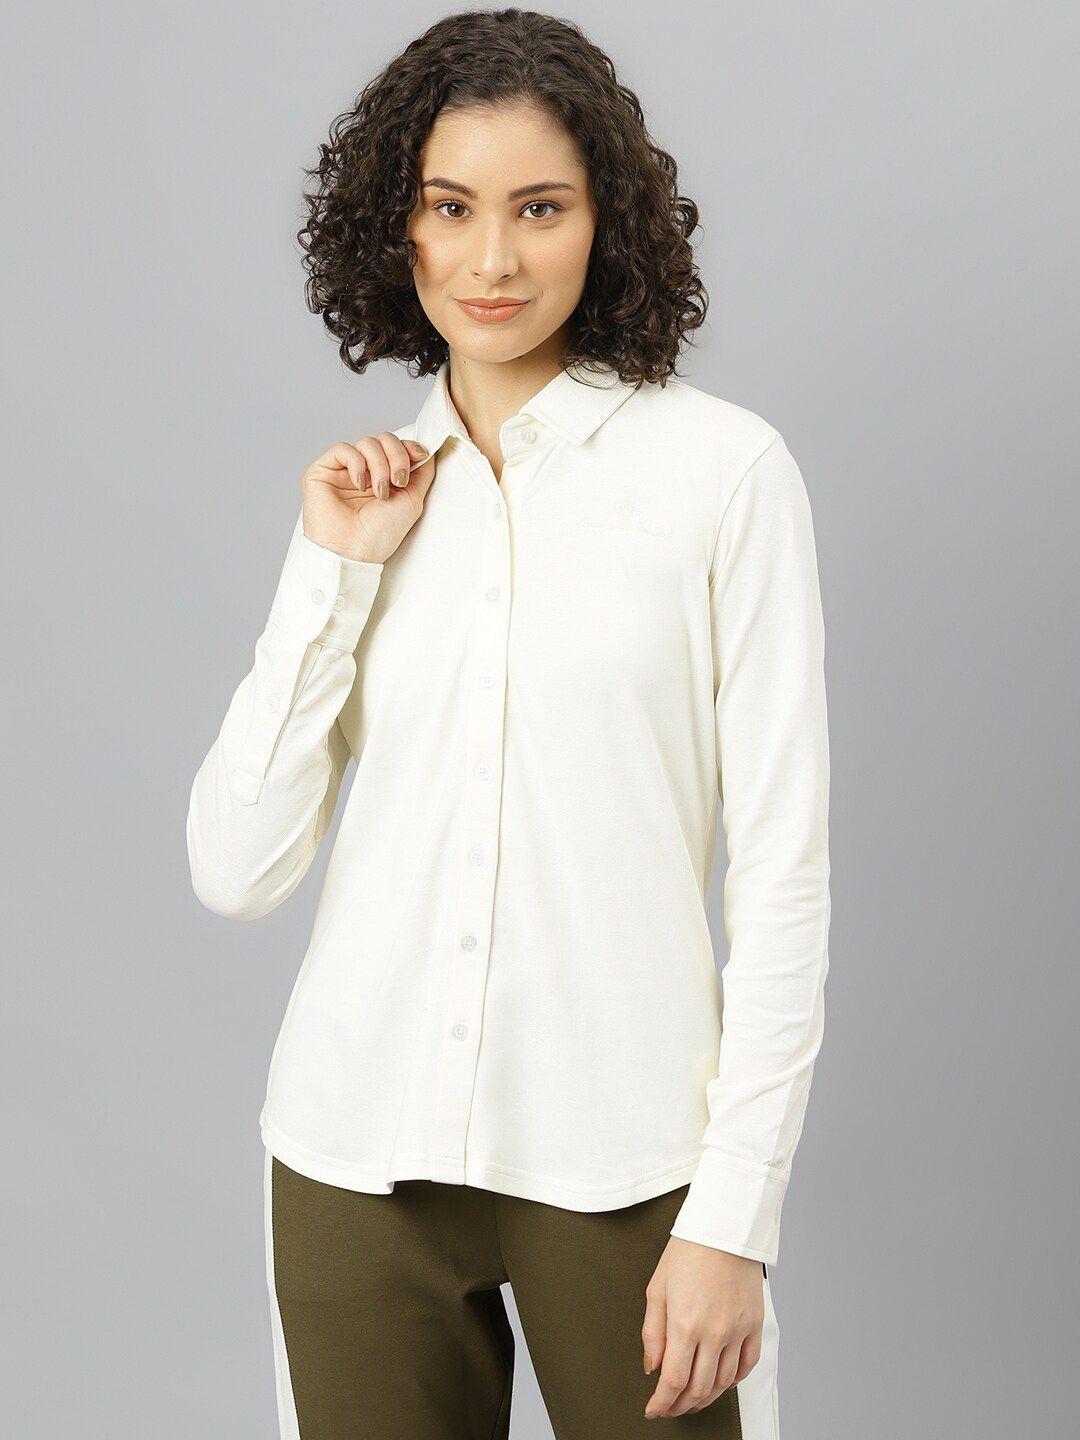 beverly hills polo club women cream solid cotton casual shirt